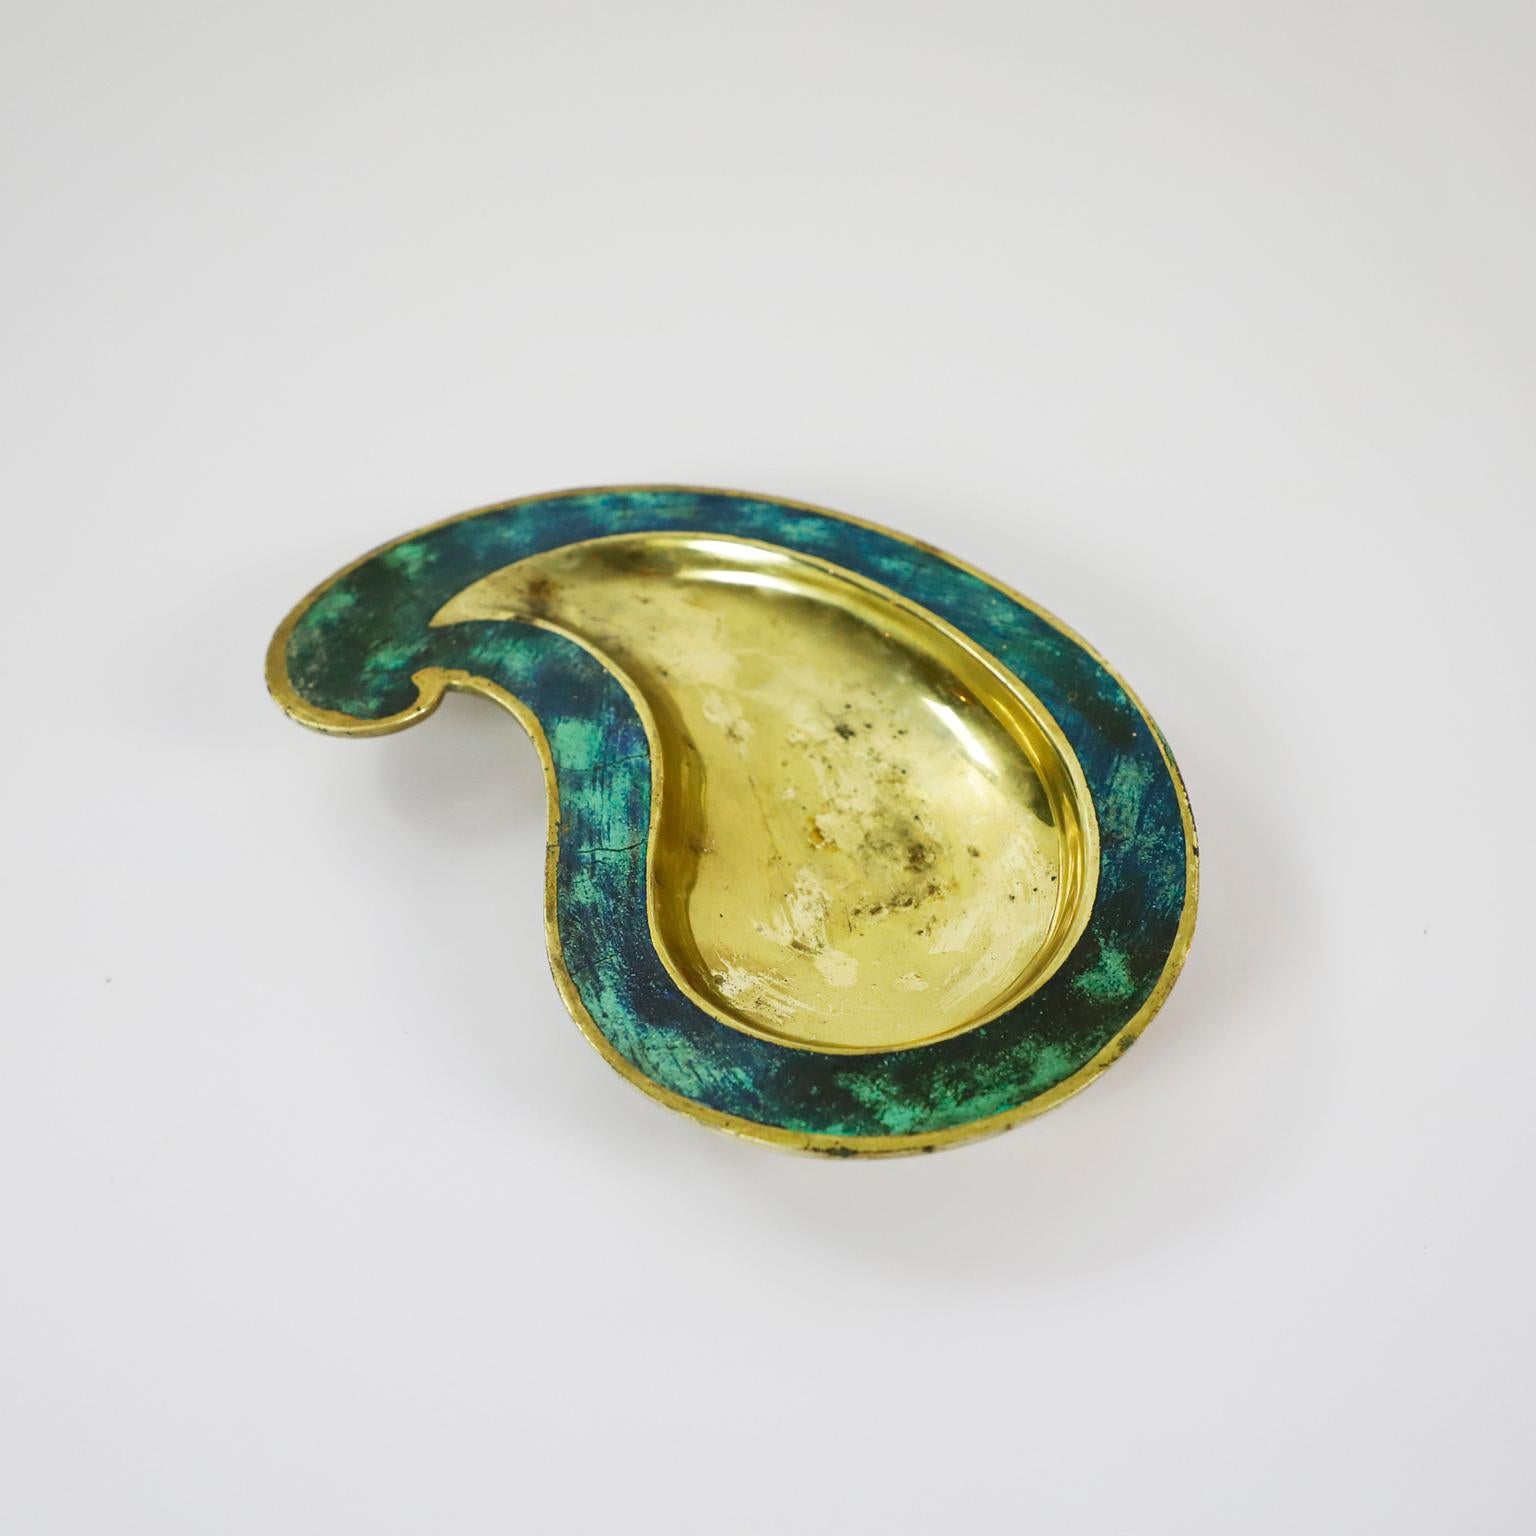 Circa 1960, we offer this ashtray designed by Pepe Mendoza.

Designer, Pepe Mendoza ran a foundry in Mexico that produced a limited number of furniture pieces and decorative objects in the late 1950s and 1960s. His work is characterized by a